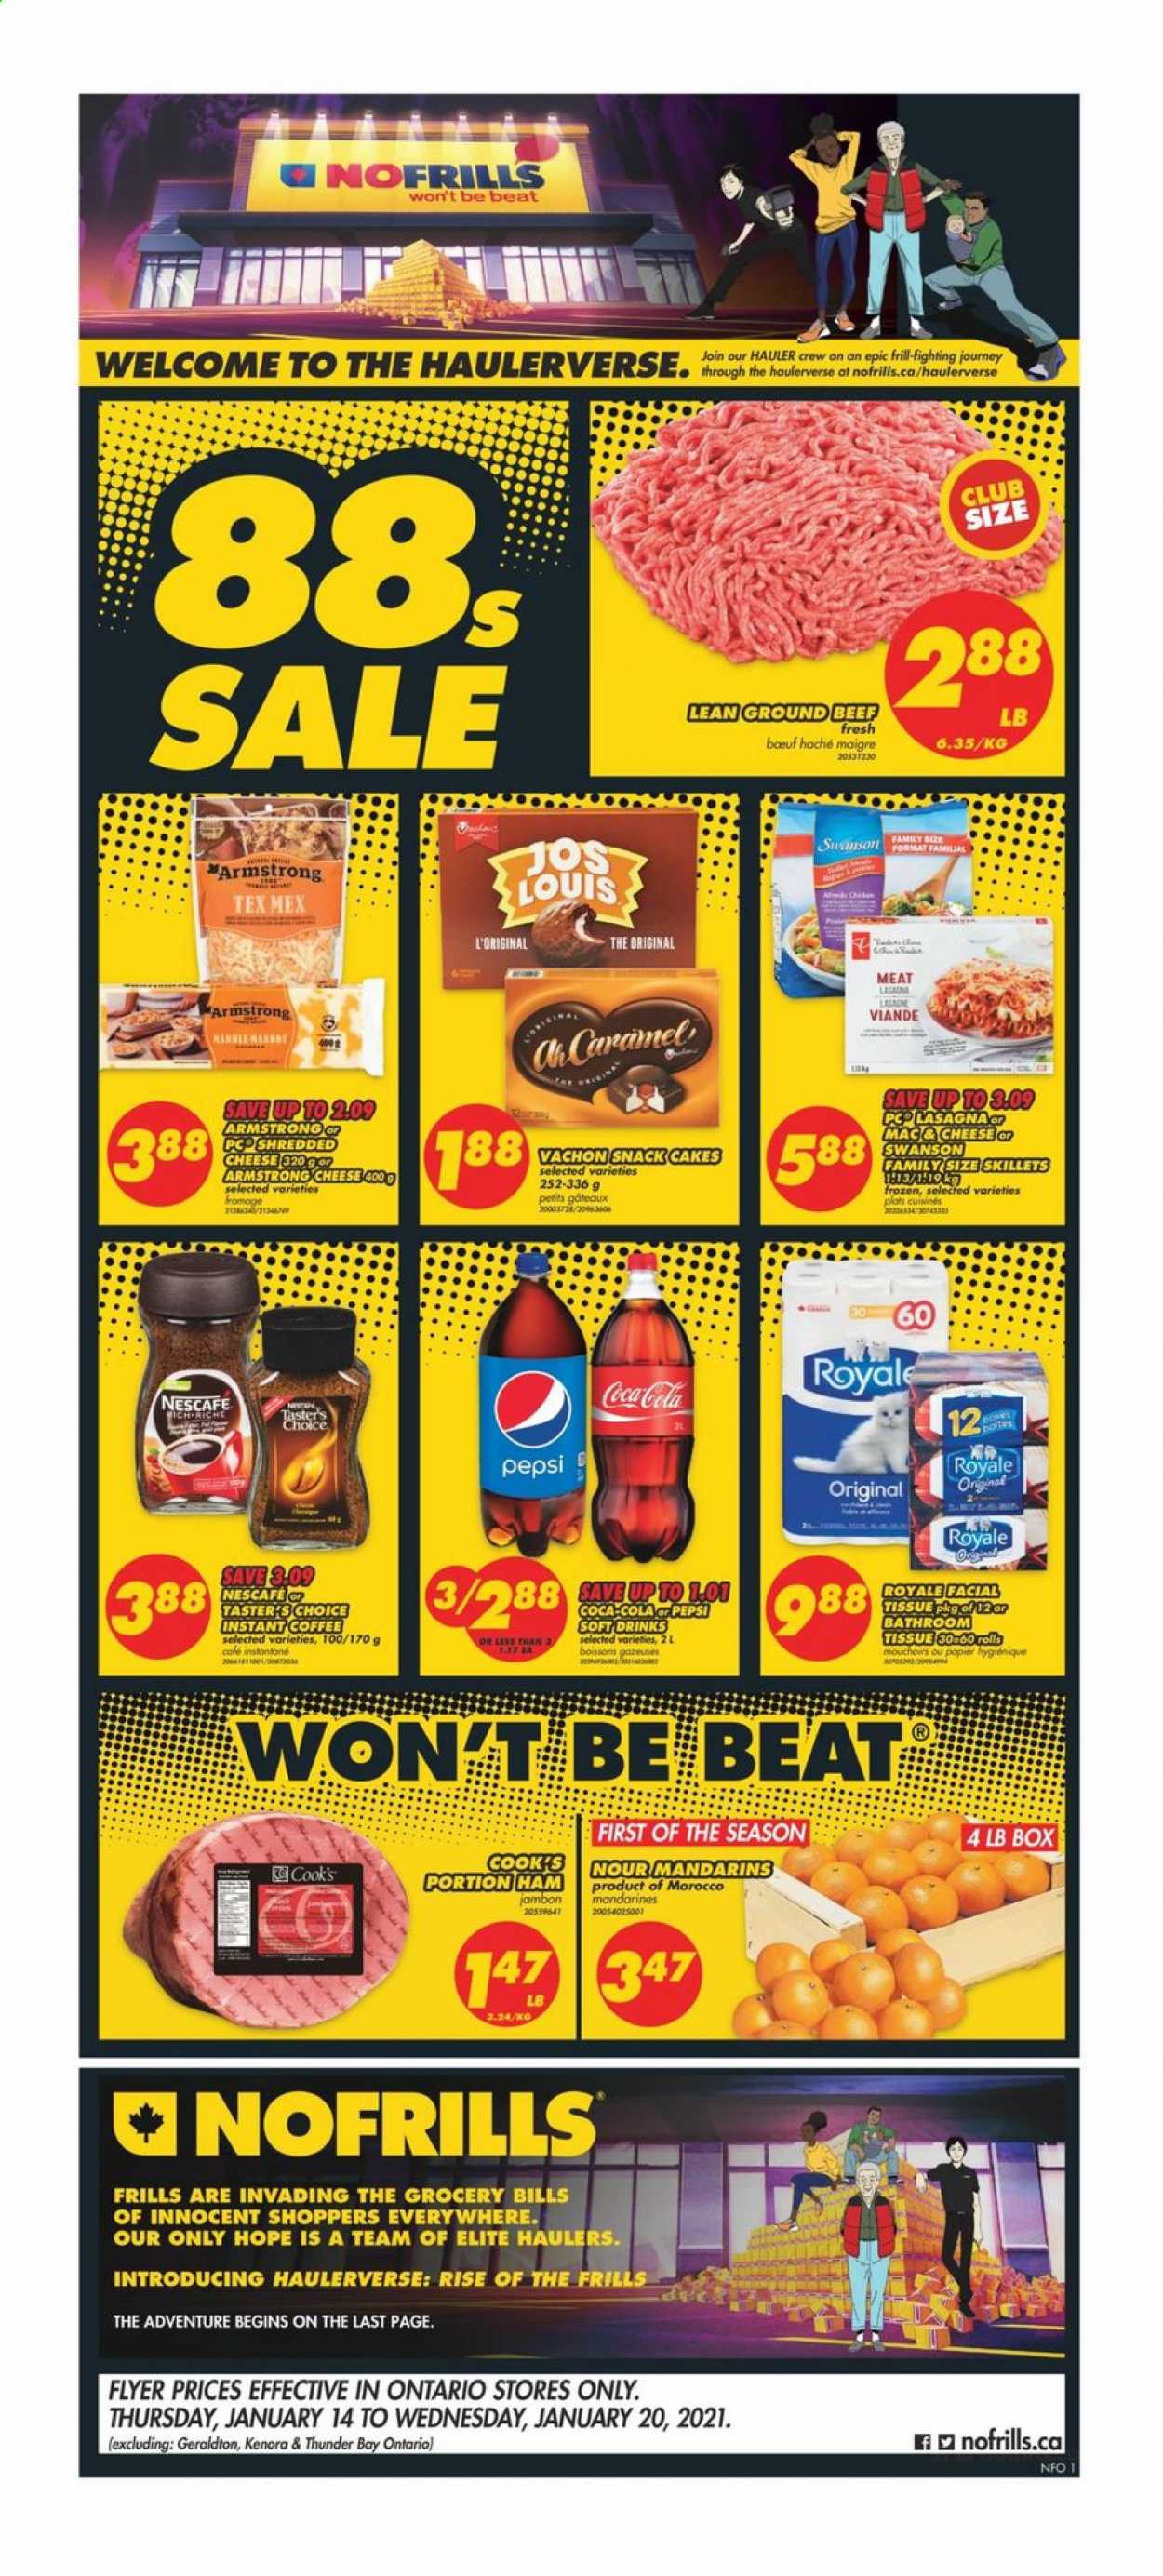 thumbnail - No Frills Flyer - January 14, 2021 - January 20, 2021 - Sales products - cake, mandarines, ham, Cook's, shredded cheese, snack, Coca-Cola, Pepsi, soft drink, instant coffee, beef meat, ground beef, bath tissue, Nescafé. Page 1.